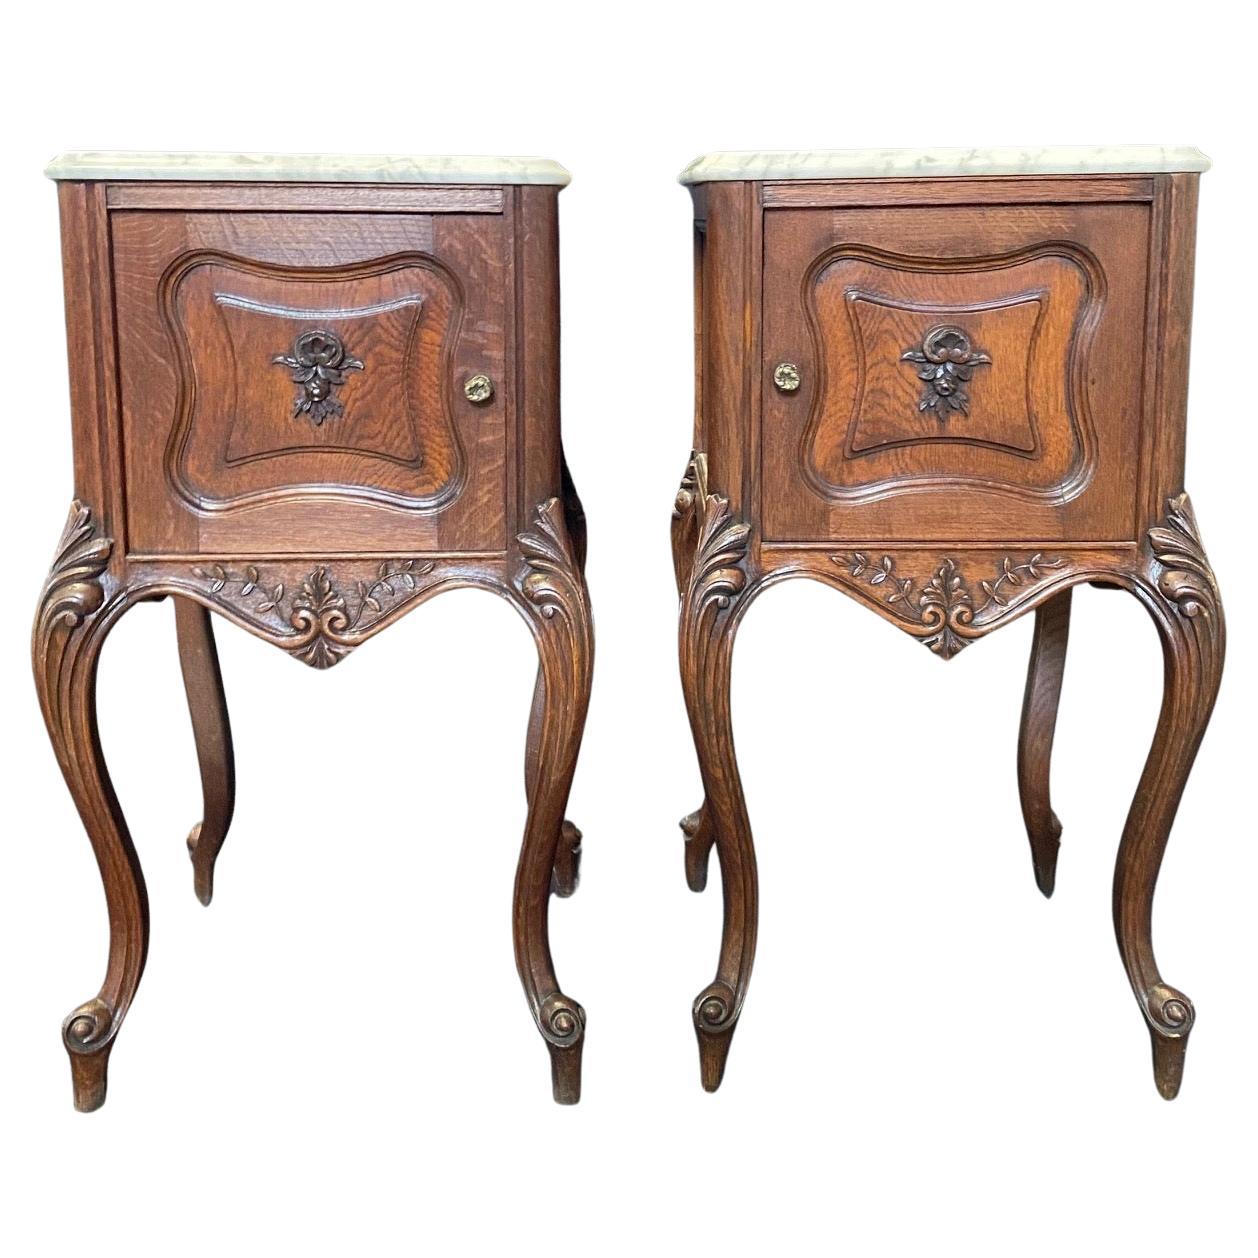 Lovely pair of 19th century French Louis XV night stands rendered in sumptuous French oak with a gorgeous patina and topped with beautifully veined Carrera marble for a timeless effect. The front facade has a beautiful carved contour enhanced by